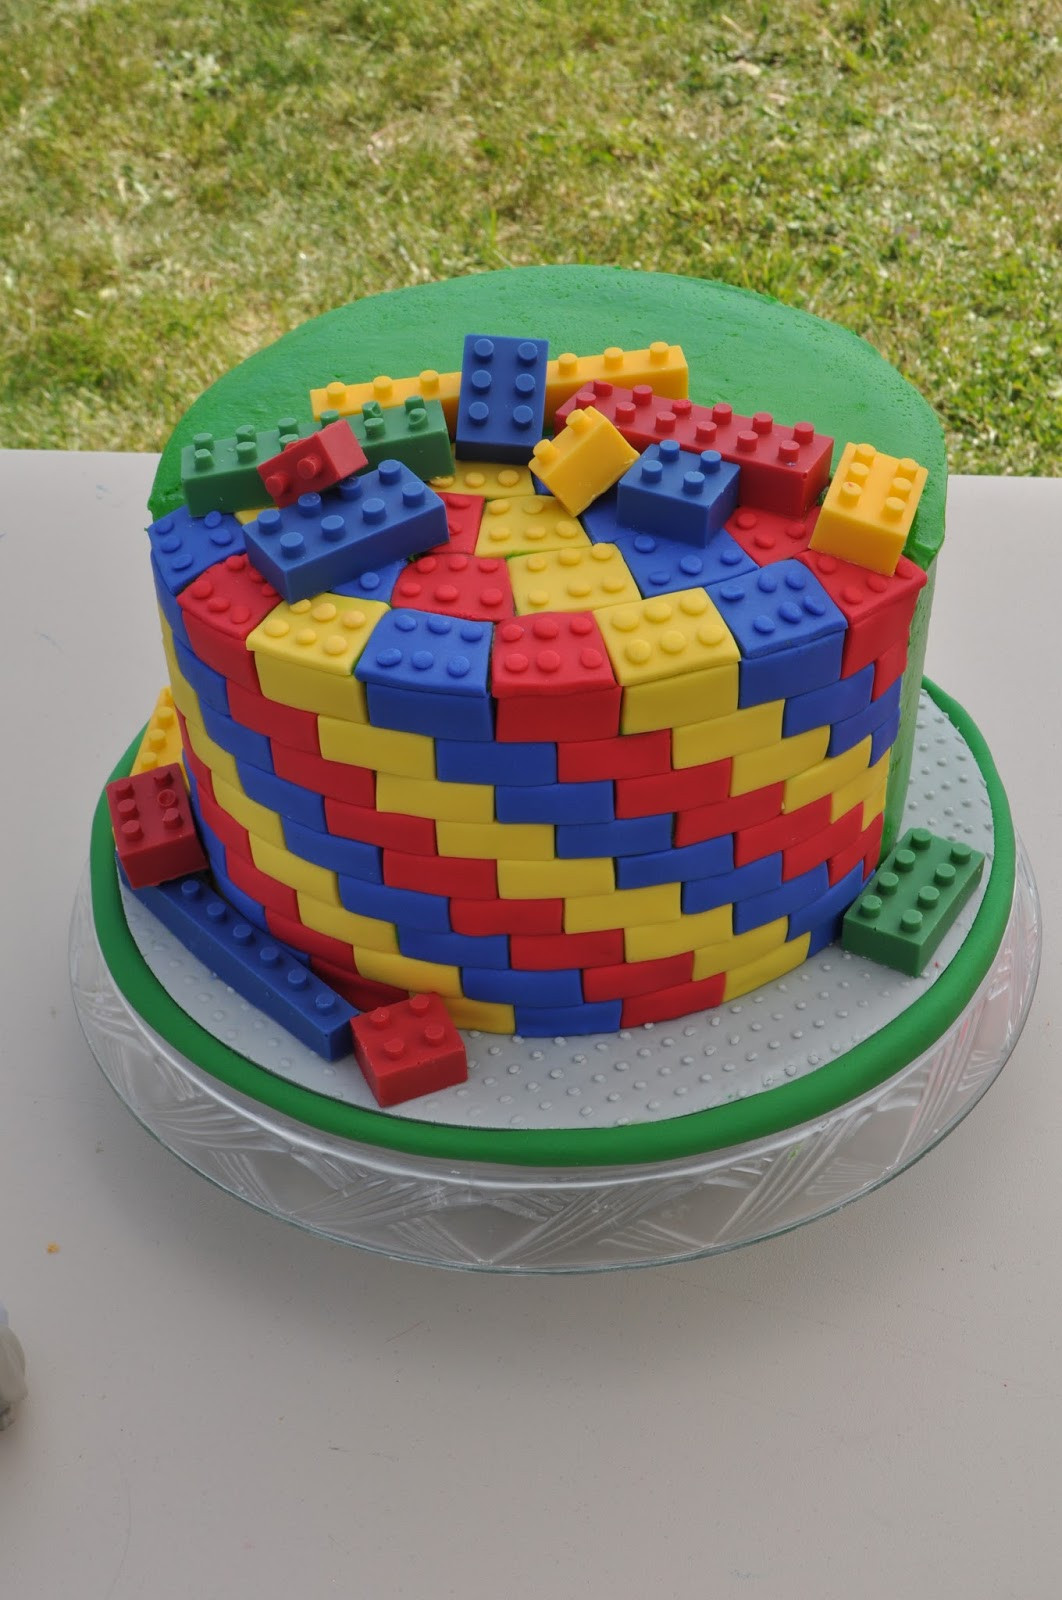 The top 15 Ideas About Lego Birthday Cake